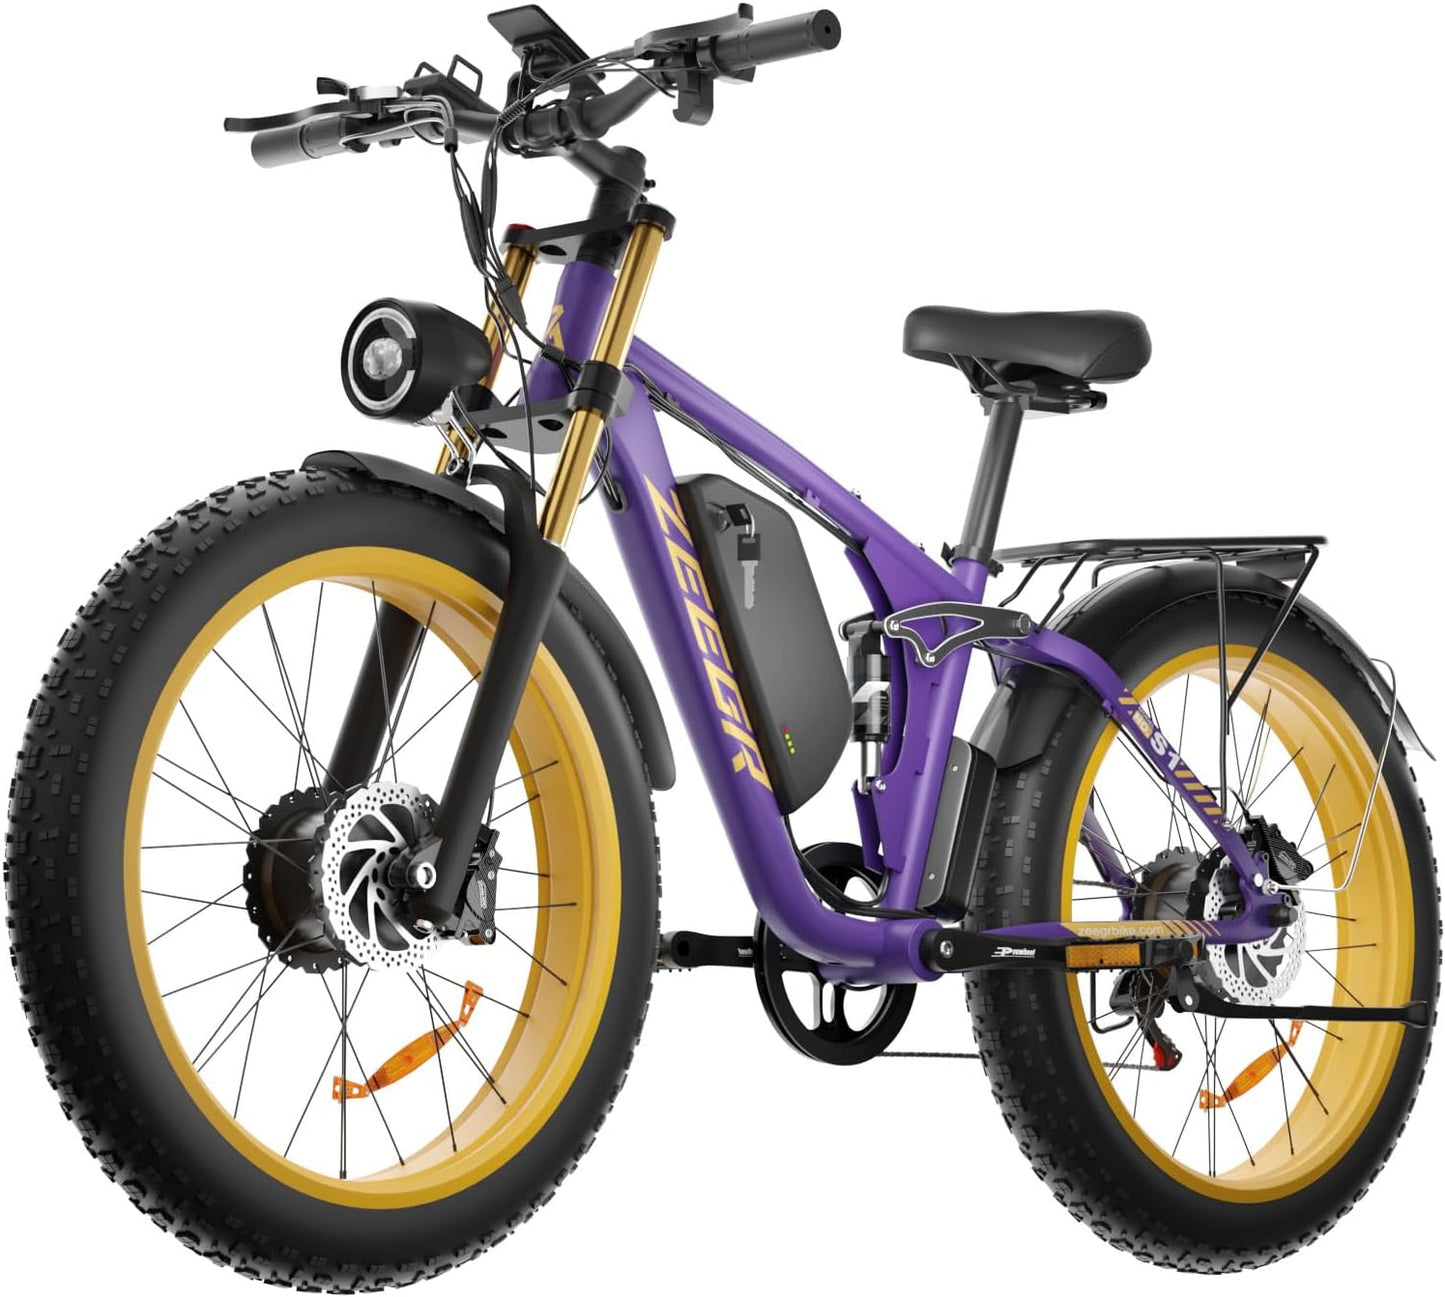 BOOMBIKE ZEEGR S1 2000W Electric bicycle